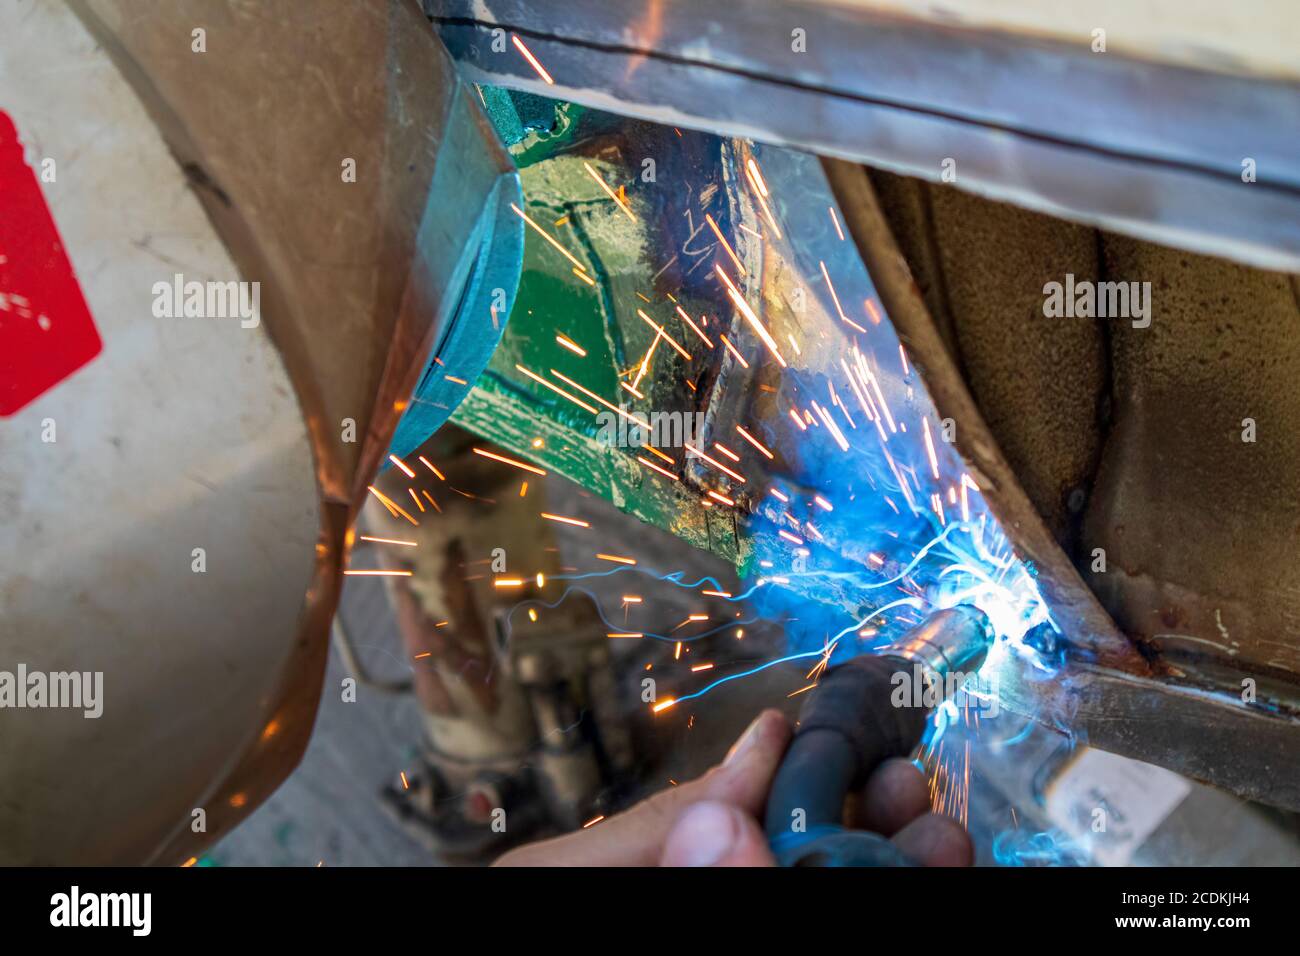 Home electric welding by a semiautomatic device MIG, repairing an old car at home Stock Photo